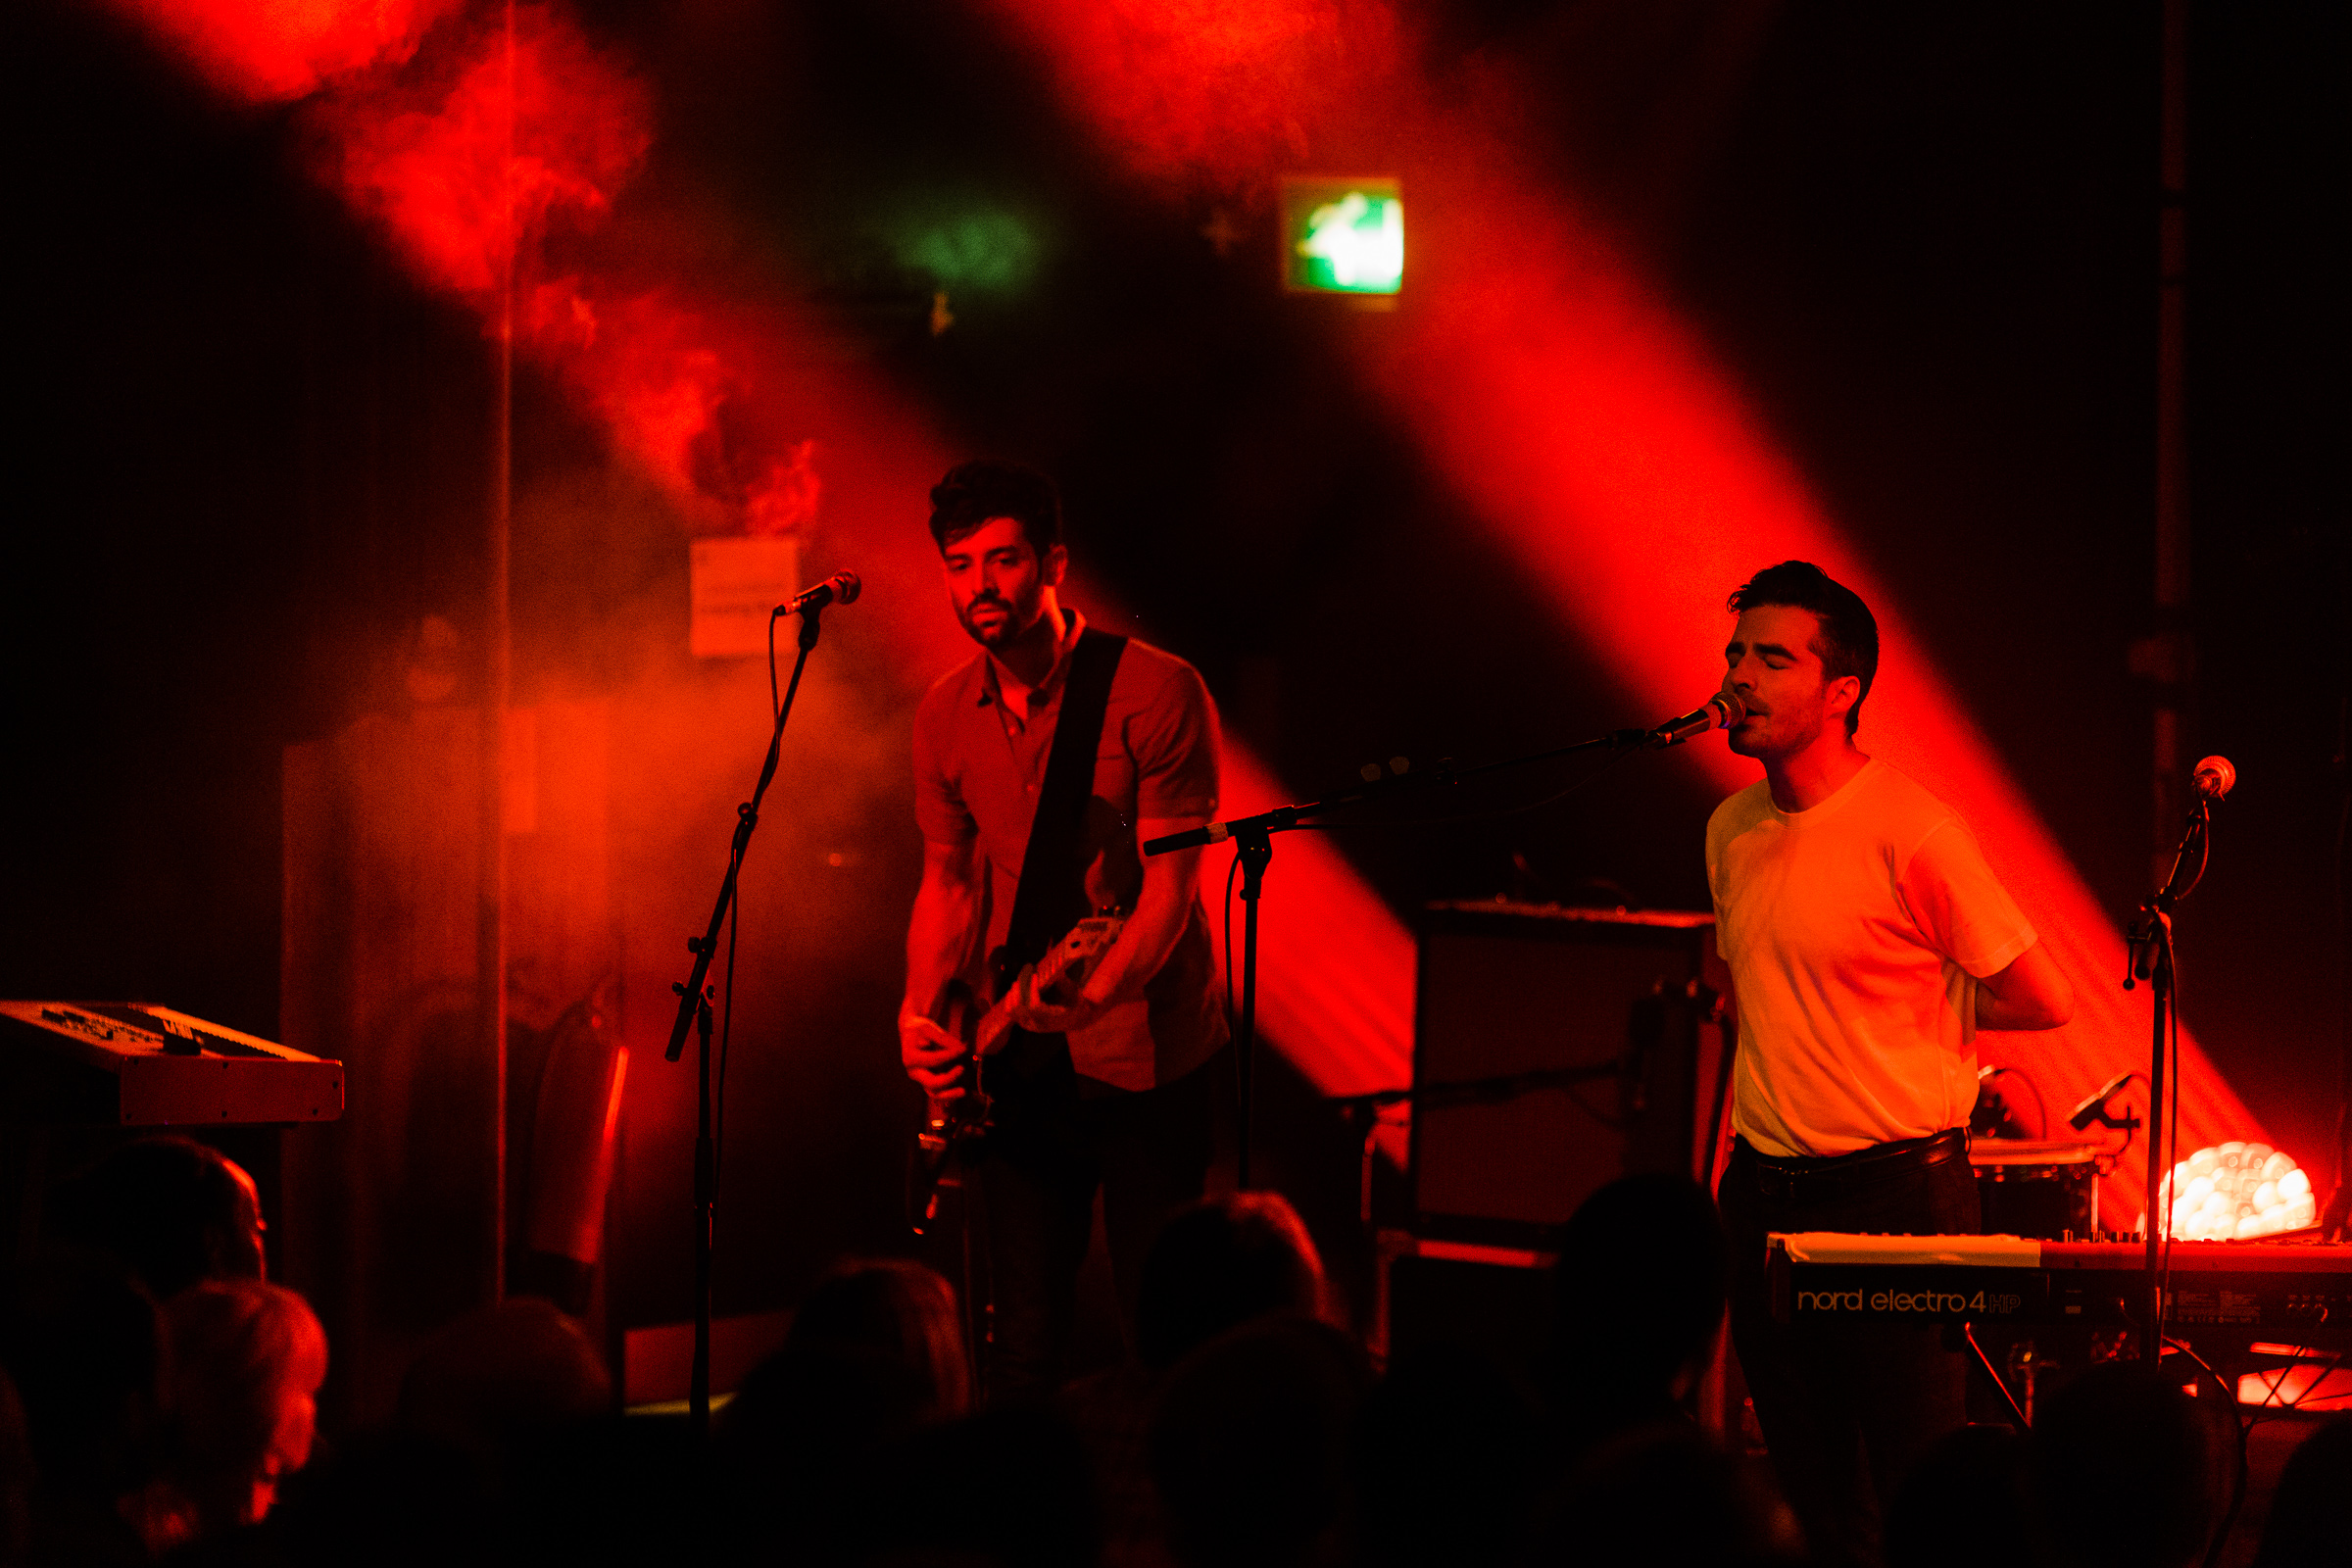 Andrew Smith and Nathan Nicholson of The Boxer Rebellion on stage at Scala in 2014. The lighting is red and some of the audience can be seen.